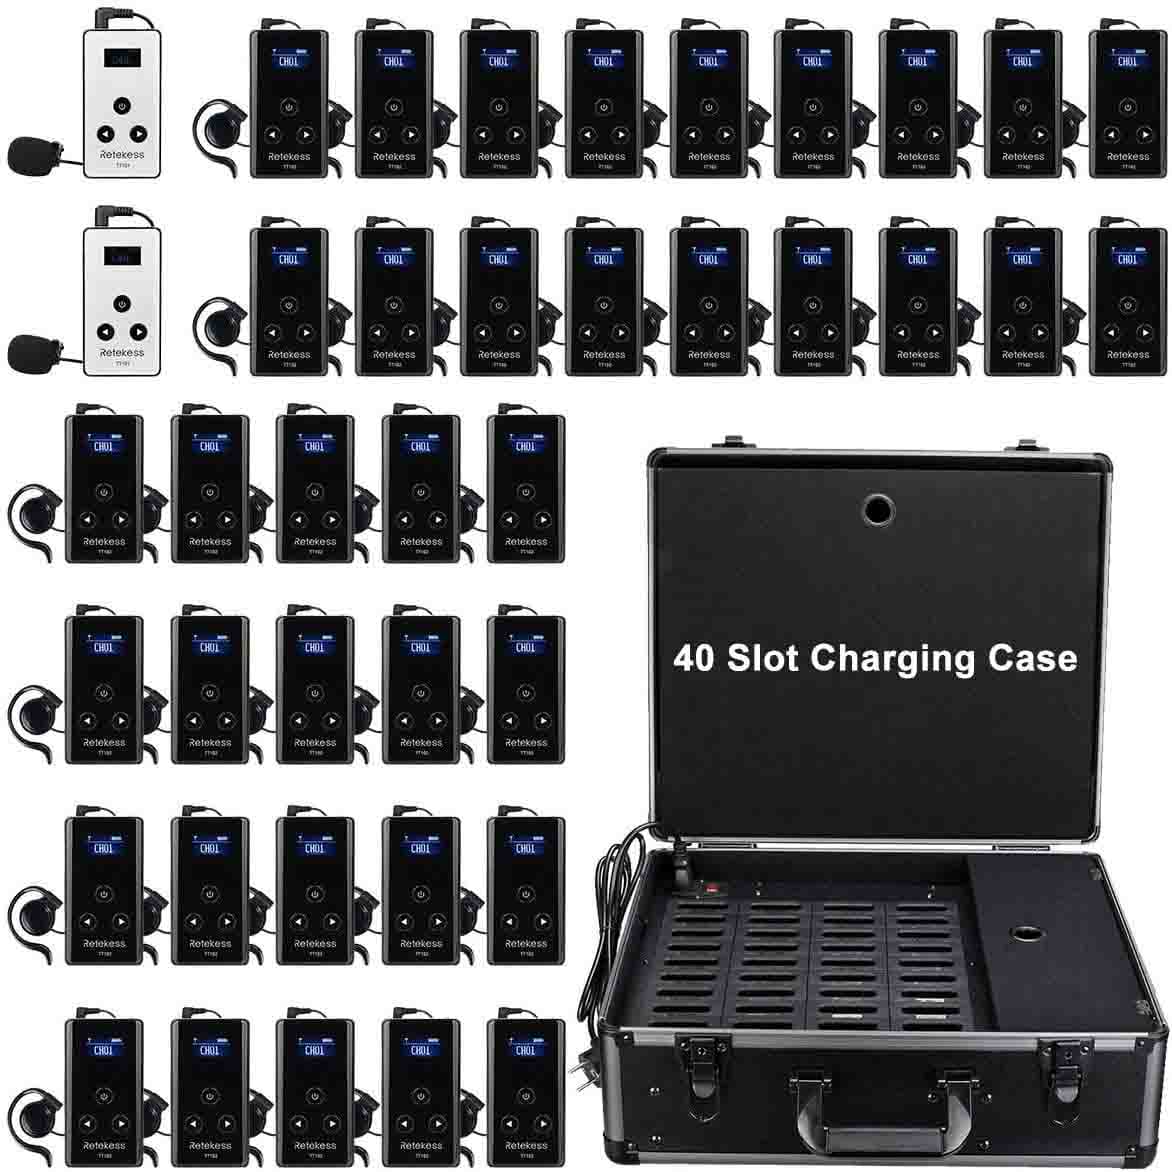 Retekess TT101/TT102 Wireless Tour Guide System Long Standby Time with 40 Slot Charging Case